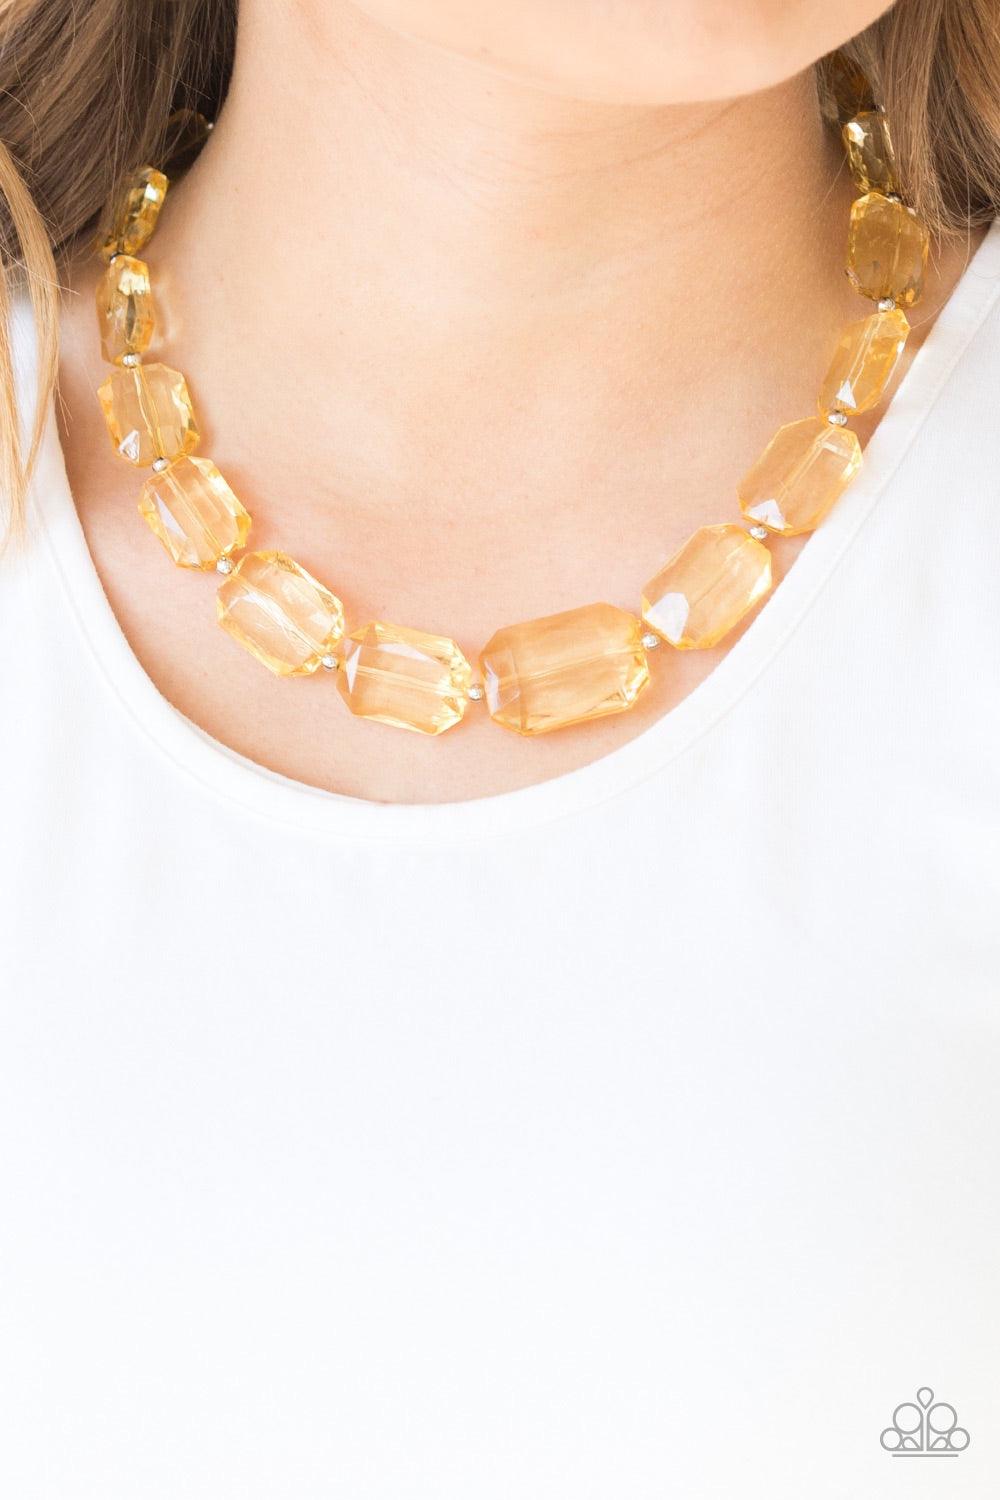 Paparazzi Accessories ICE Versa - Yellow Infused with dainty silver beads, glassy yellow emerald-cut beads gradually increase in size as they drape below the collar. Features an adjustable clasp closure. Jewelry